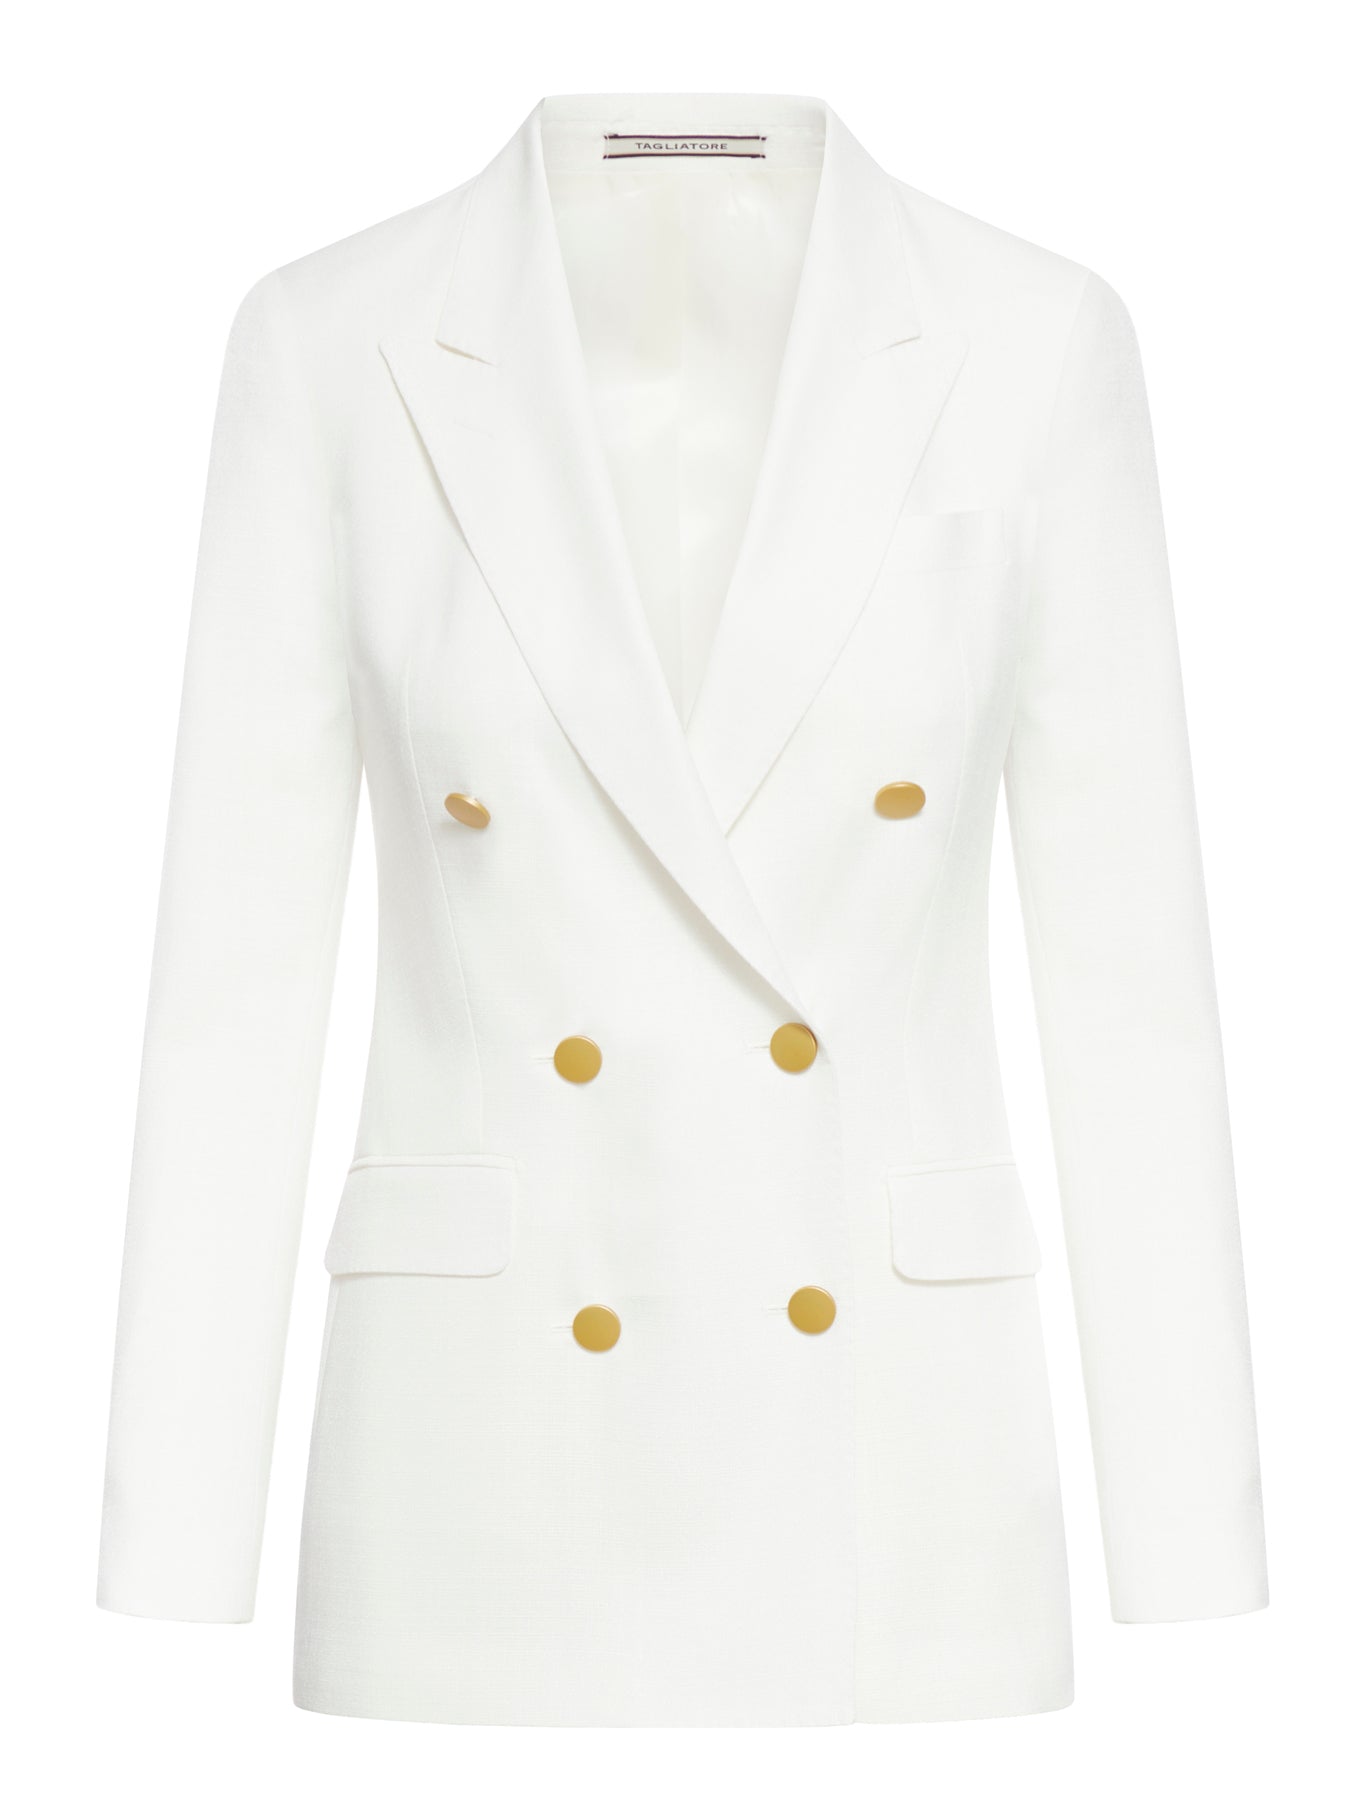 DOUBLE-BREASTED PARIGI JACKET IN COTTON